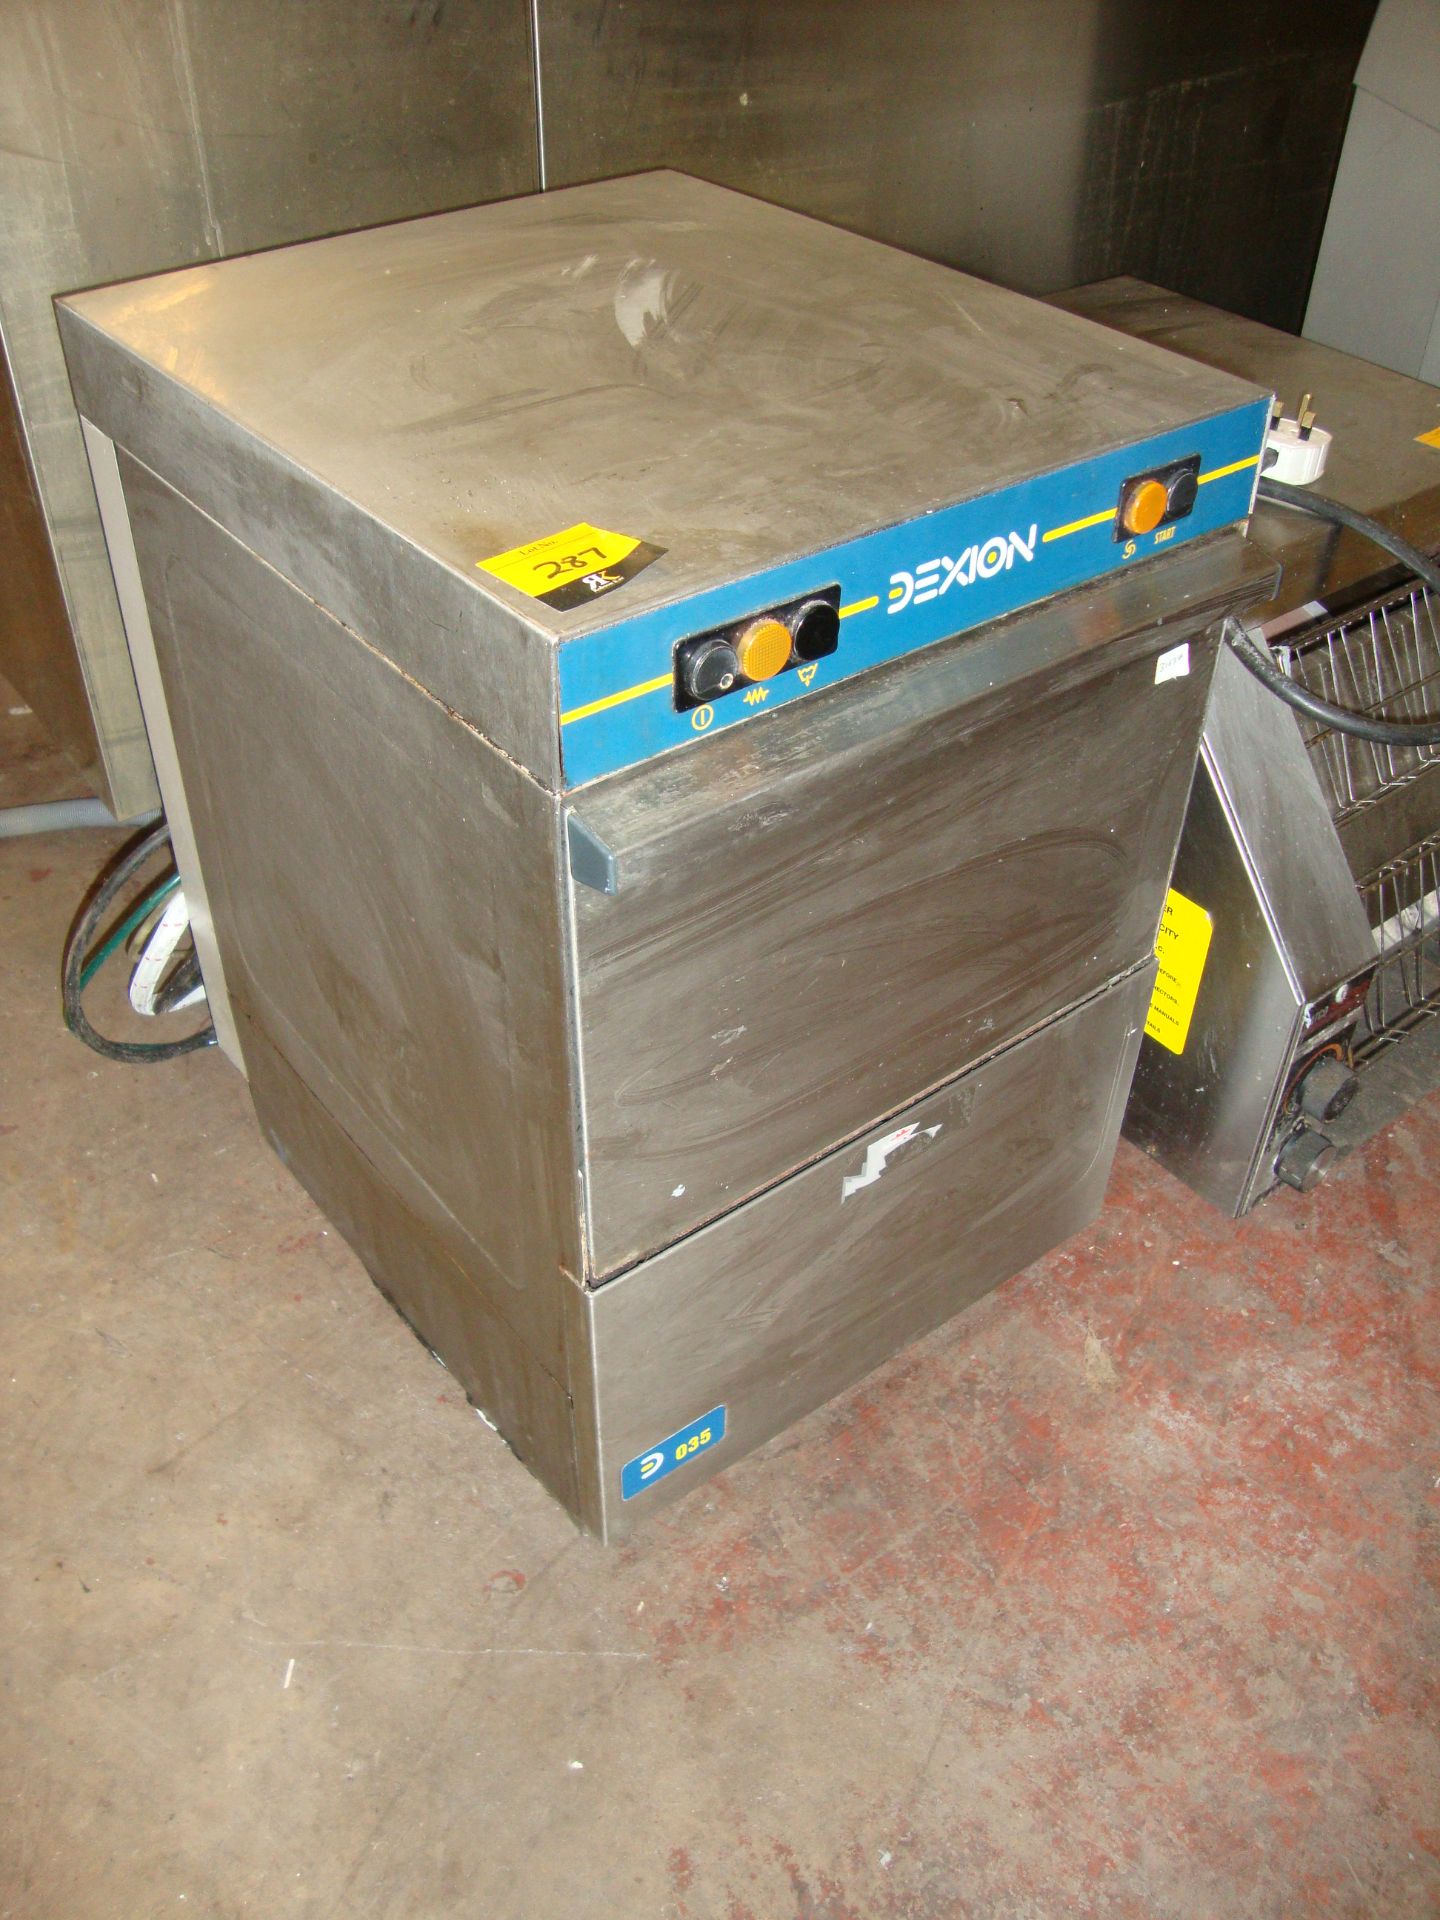 Dexion compact glass washer